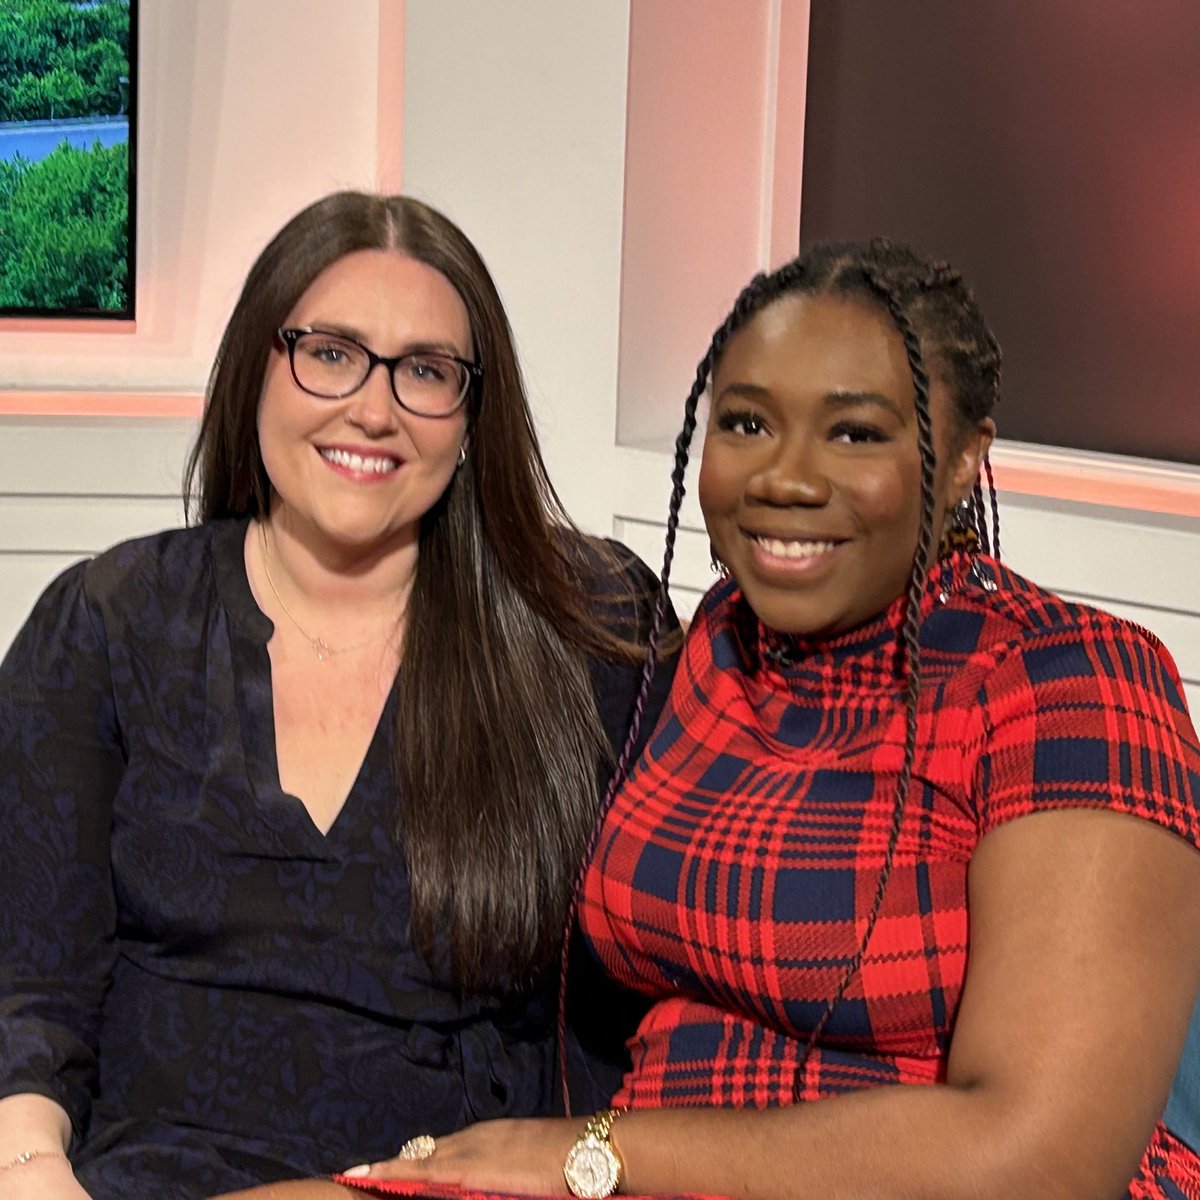 #Tonight (Wed, May 15) on Out of the Fog, host Laurabel Mba welcomes Renee Pilgrim, Health and Wellness Coach, and Hannah Sparks, Owner, Spark Your Growth Counselling. Catch it tonight on #Rogerstv at 7:30pm!